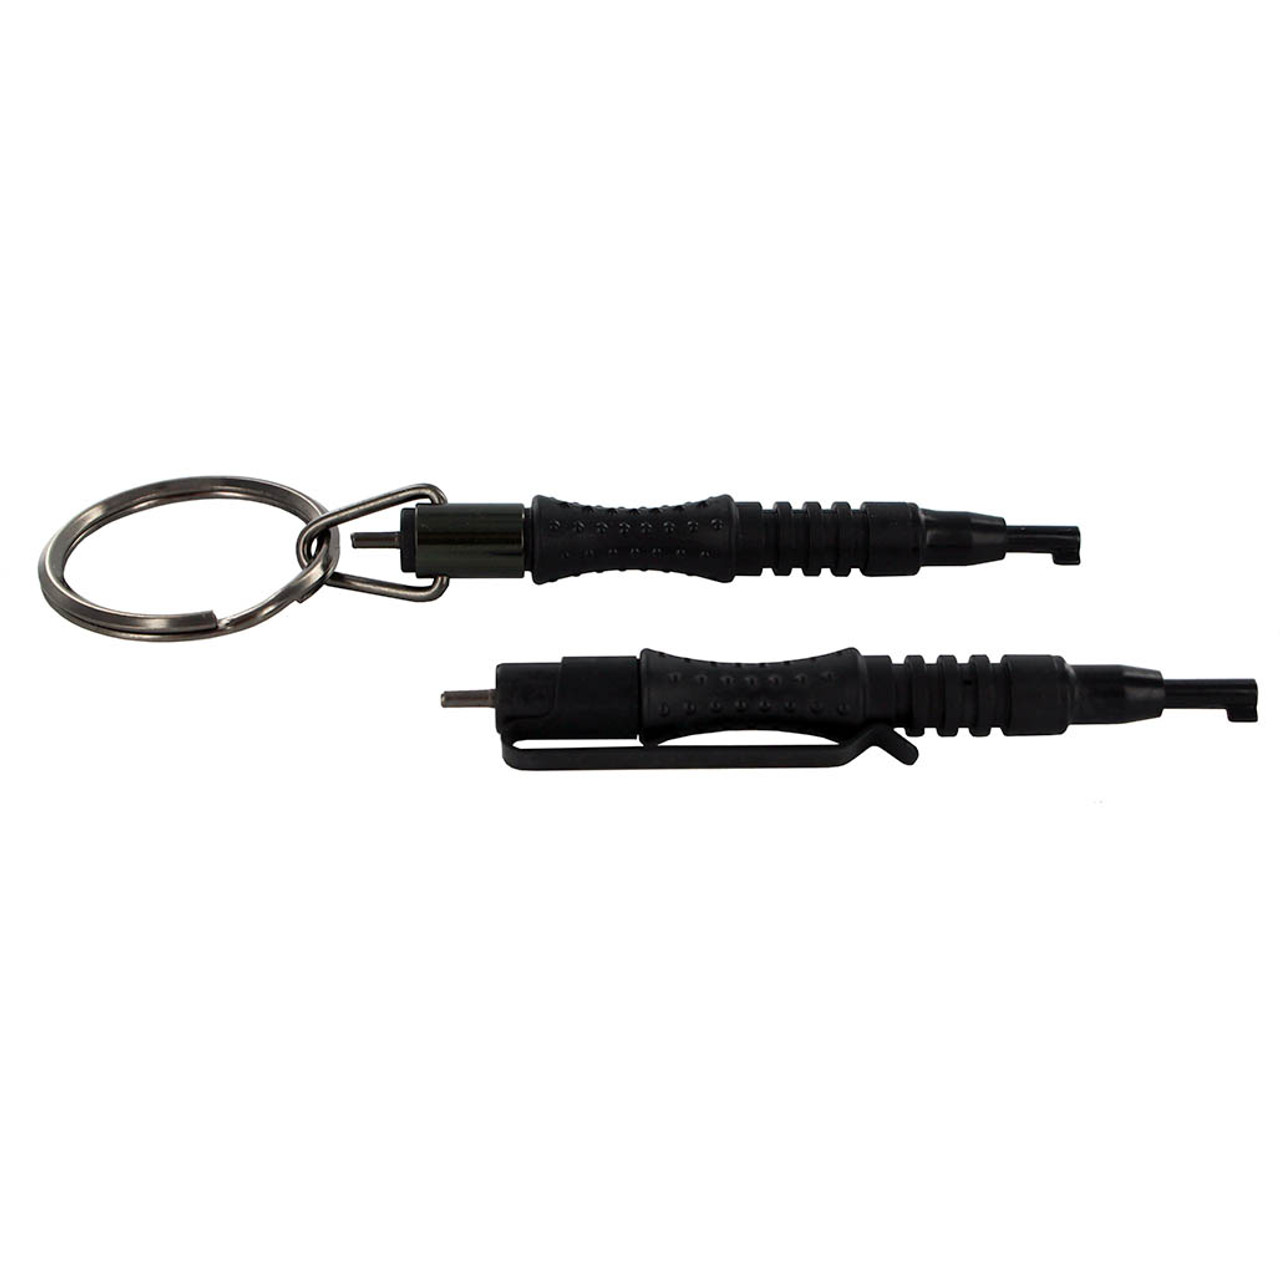 Survival Resources > New Products > Concealed Handcuff Key Buckle